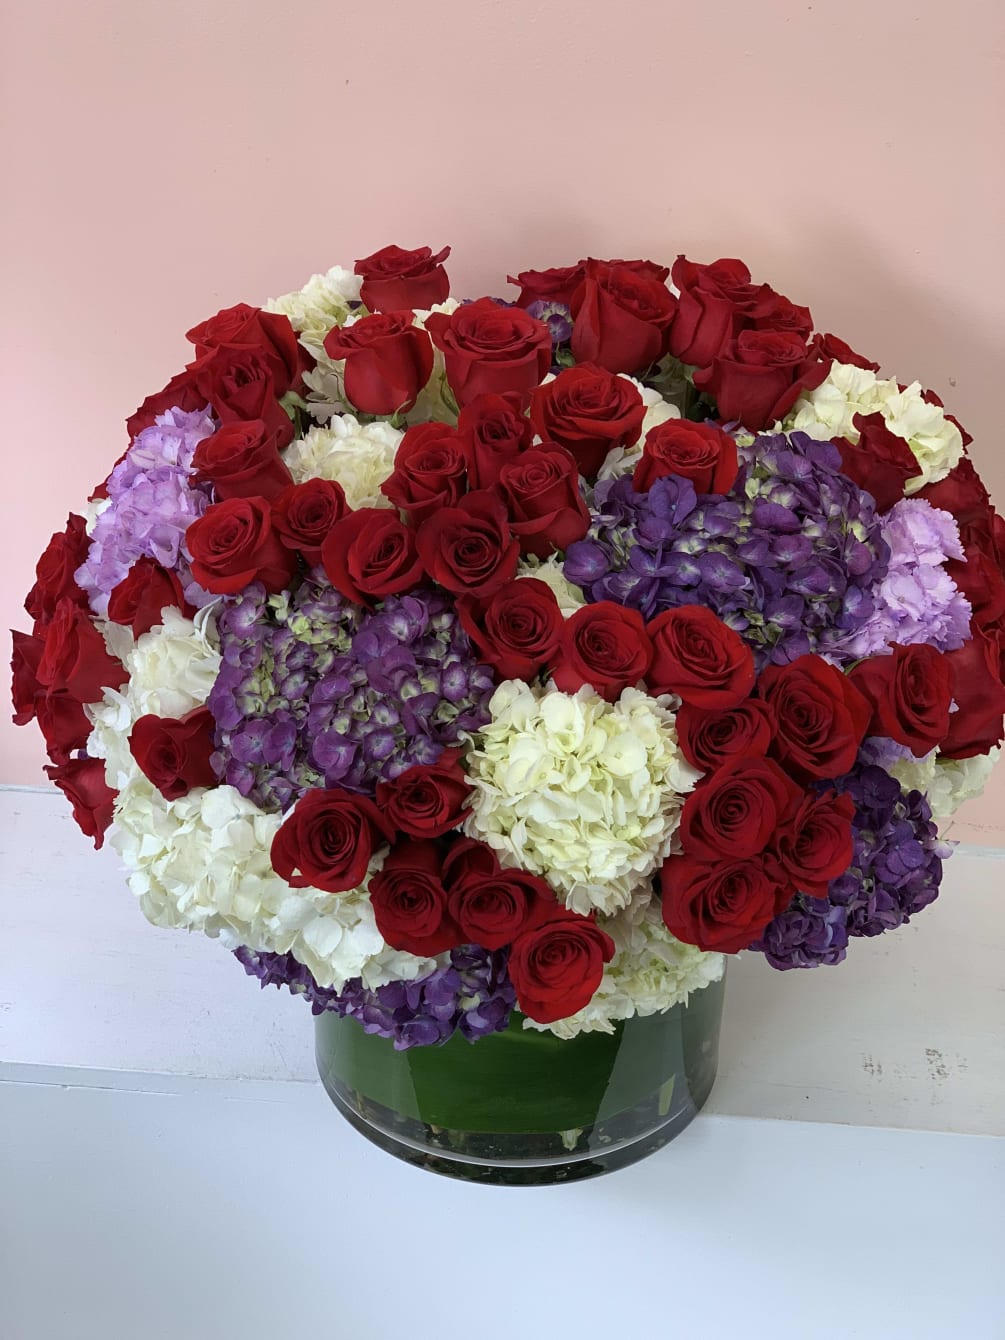 Large, magnificent flower arrangement made with 99 long stem red roses and